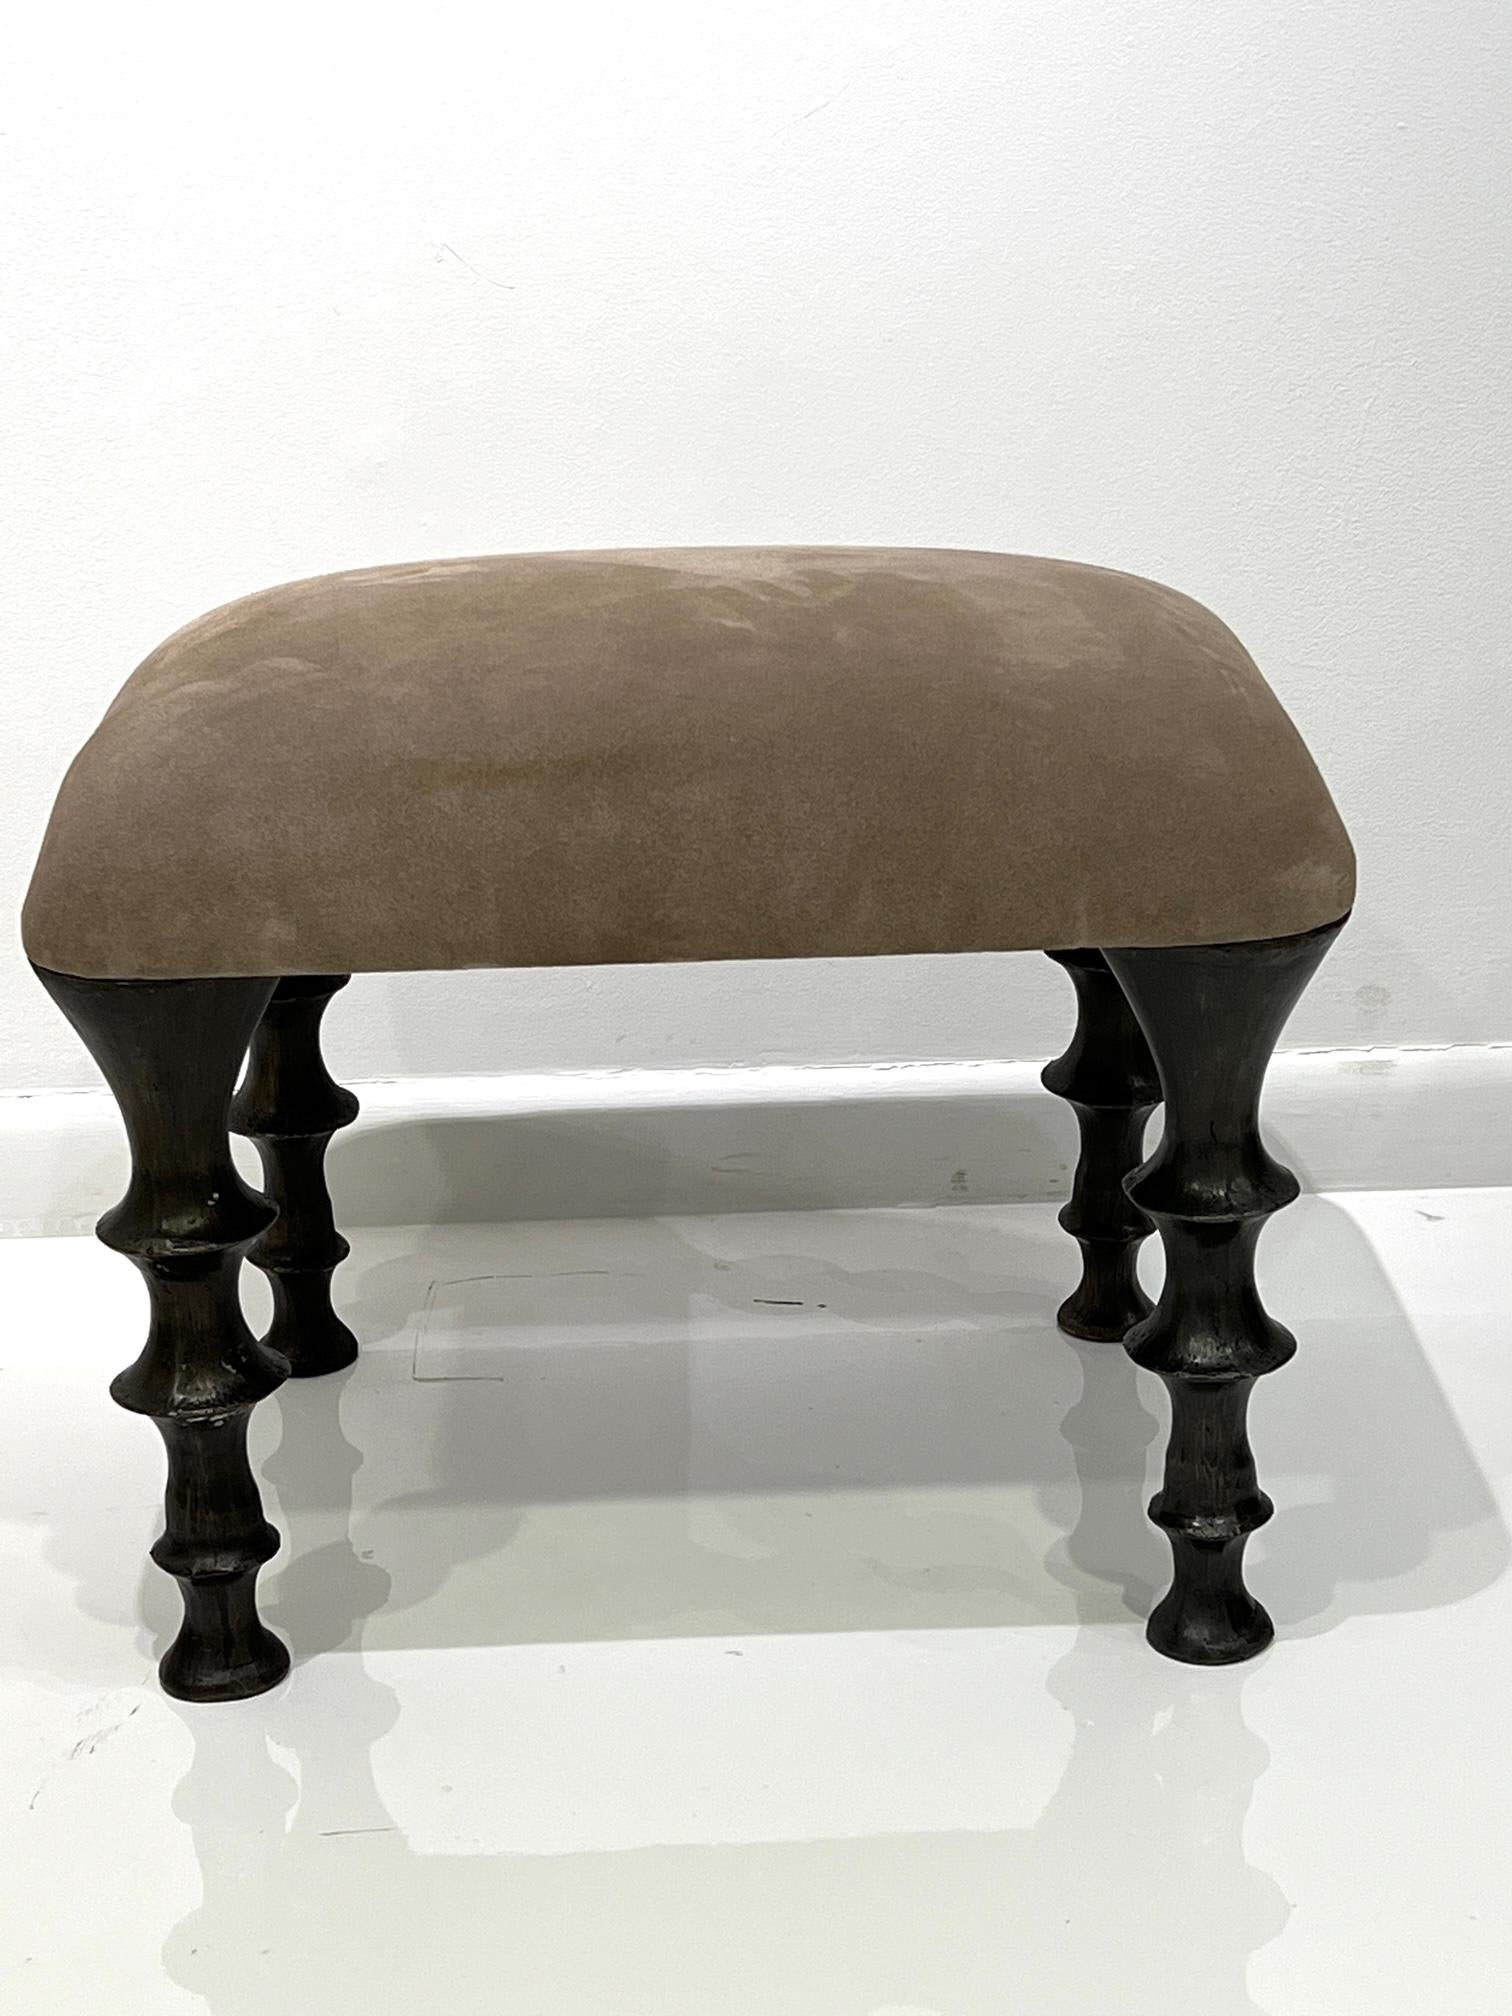 Two stools with cast bronze legs and a brown suede cushions. The design of the legs have an organic texture. These stools will make a powerful statement in your interior. Stools can also be made custom in different size and upholstery. (COM).